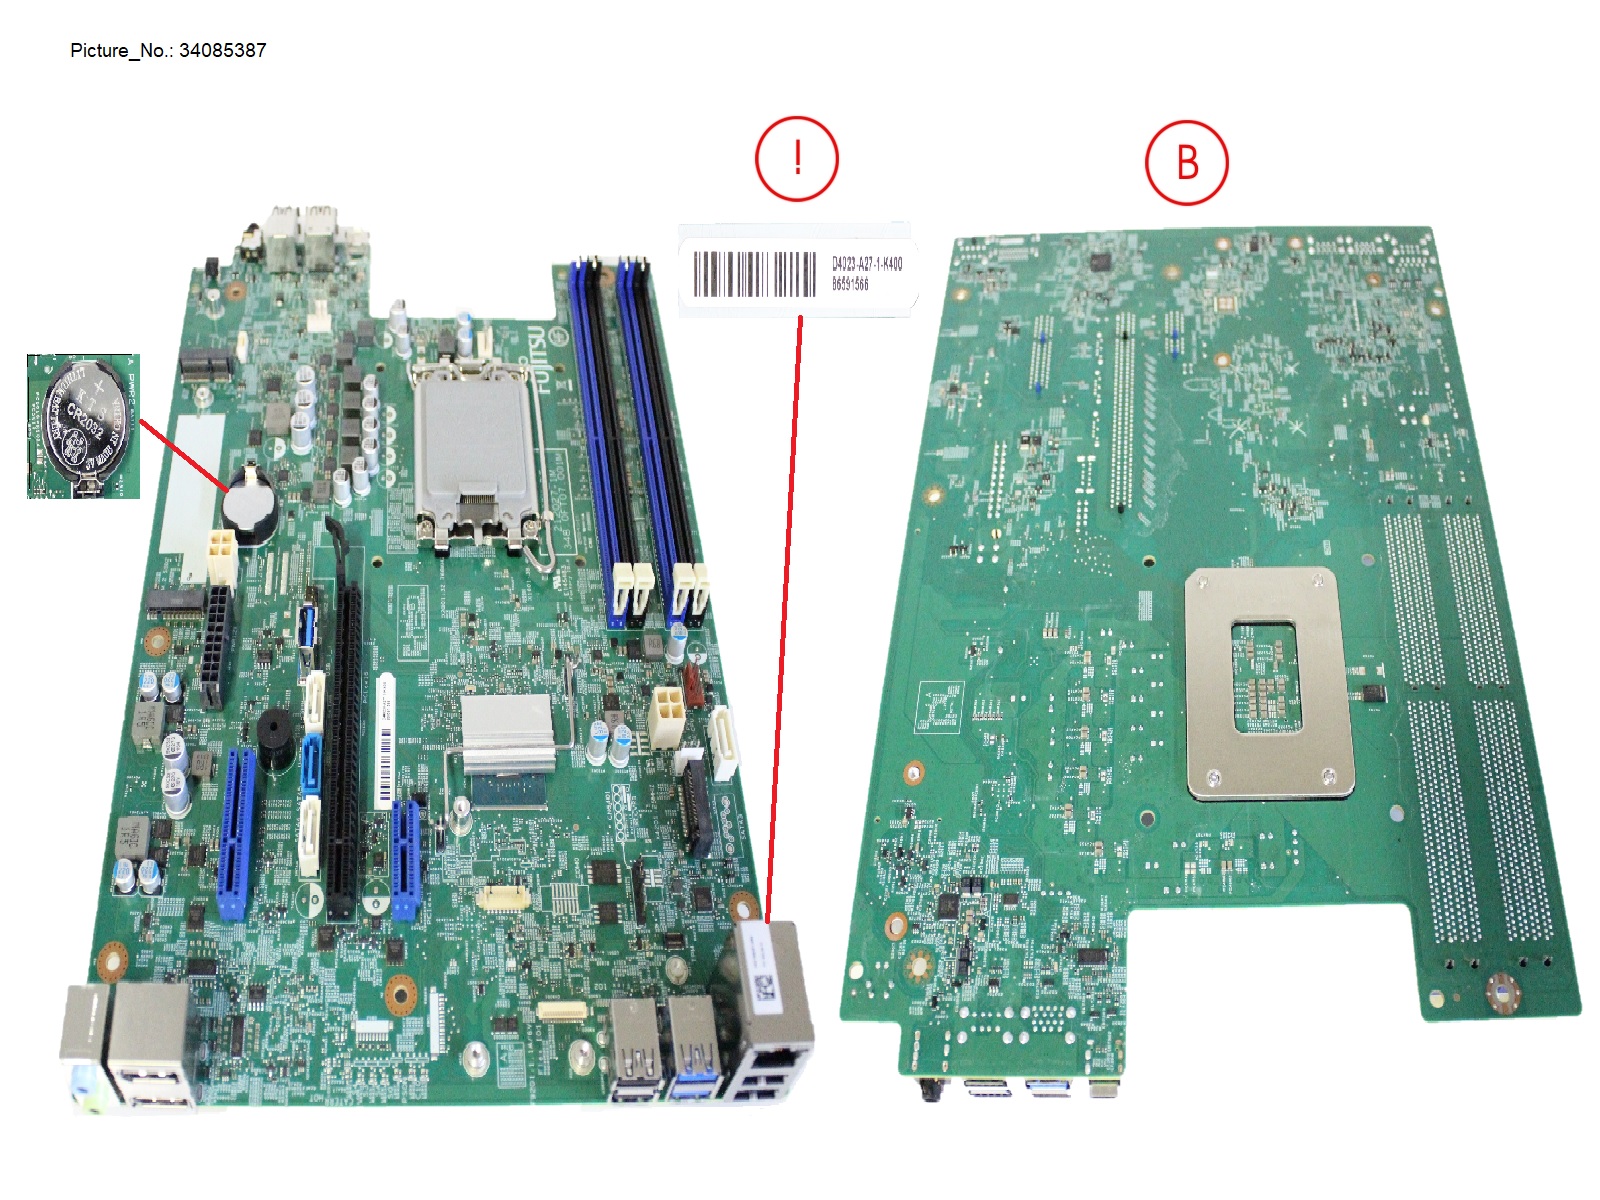 MAINBOARD D4023-A201 ADL AND RPL CPUS